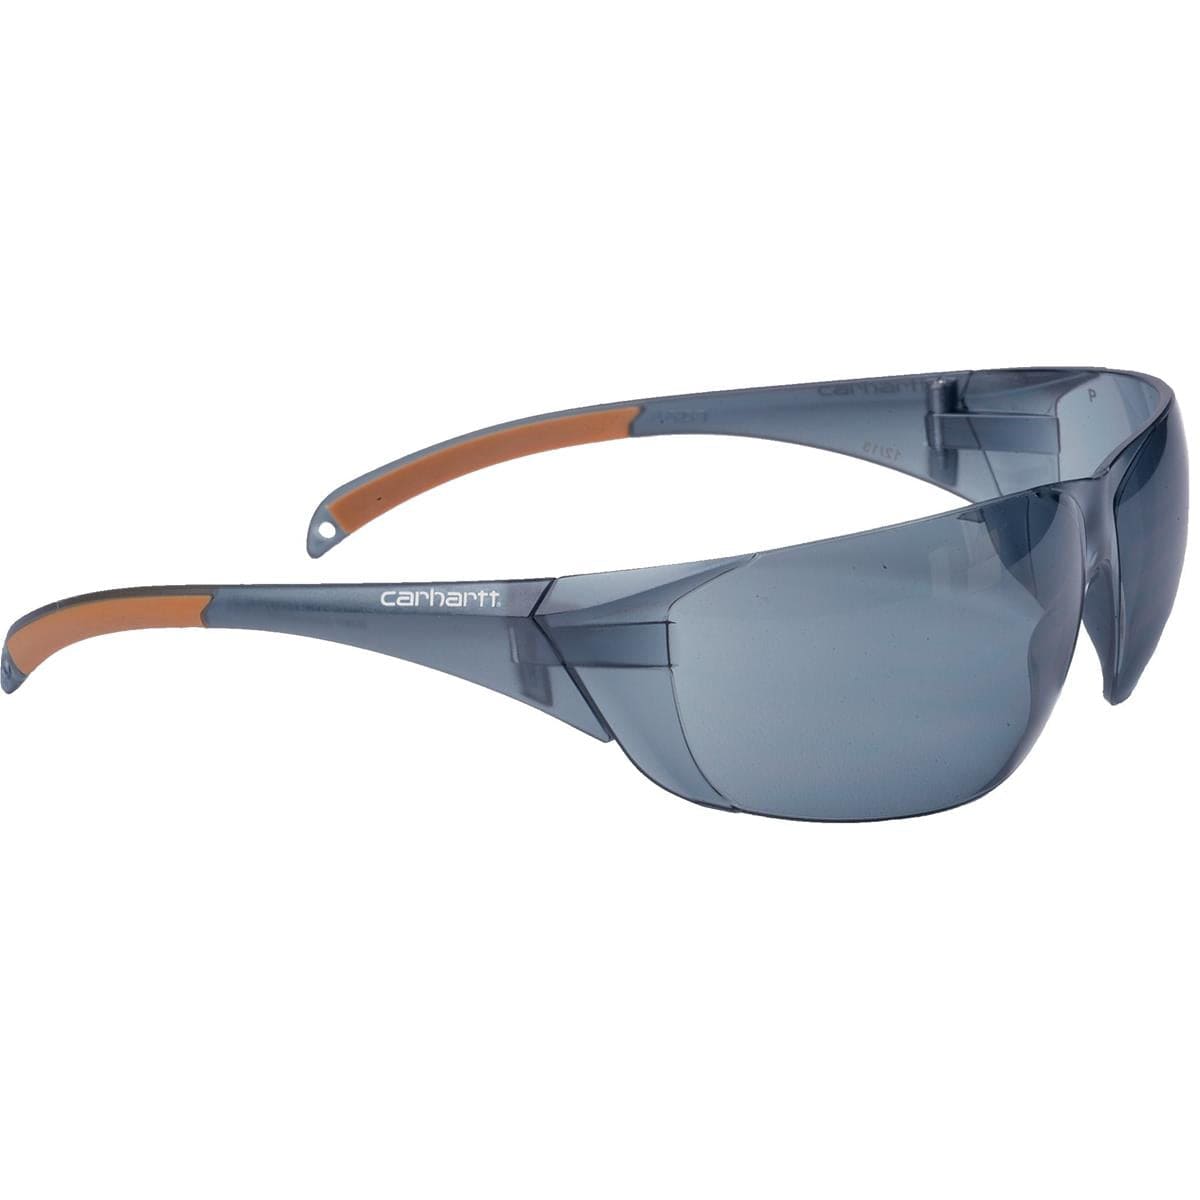 Carhartt Industrial Safety Glasses